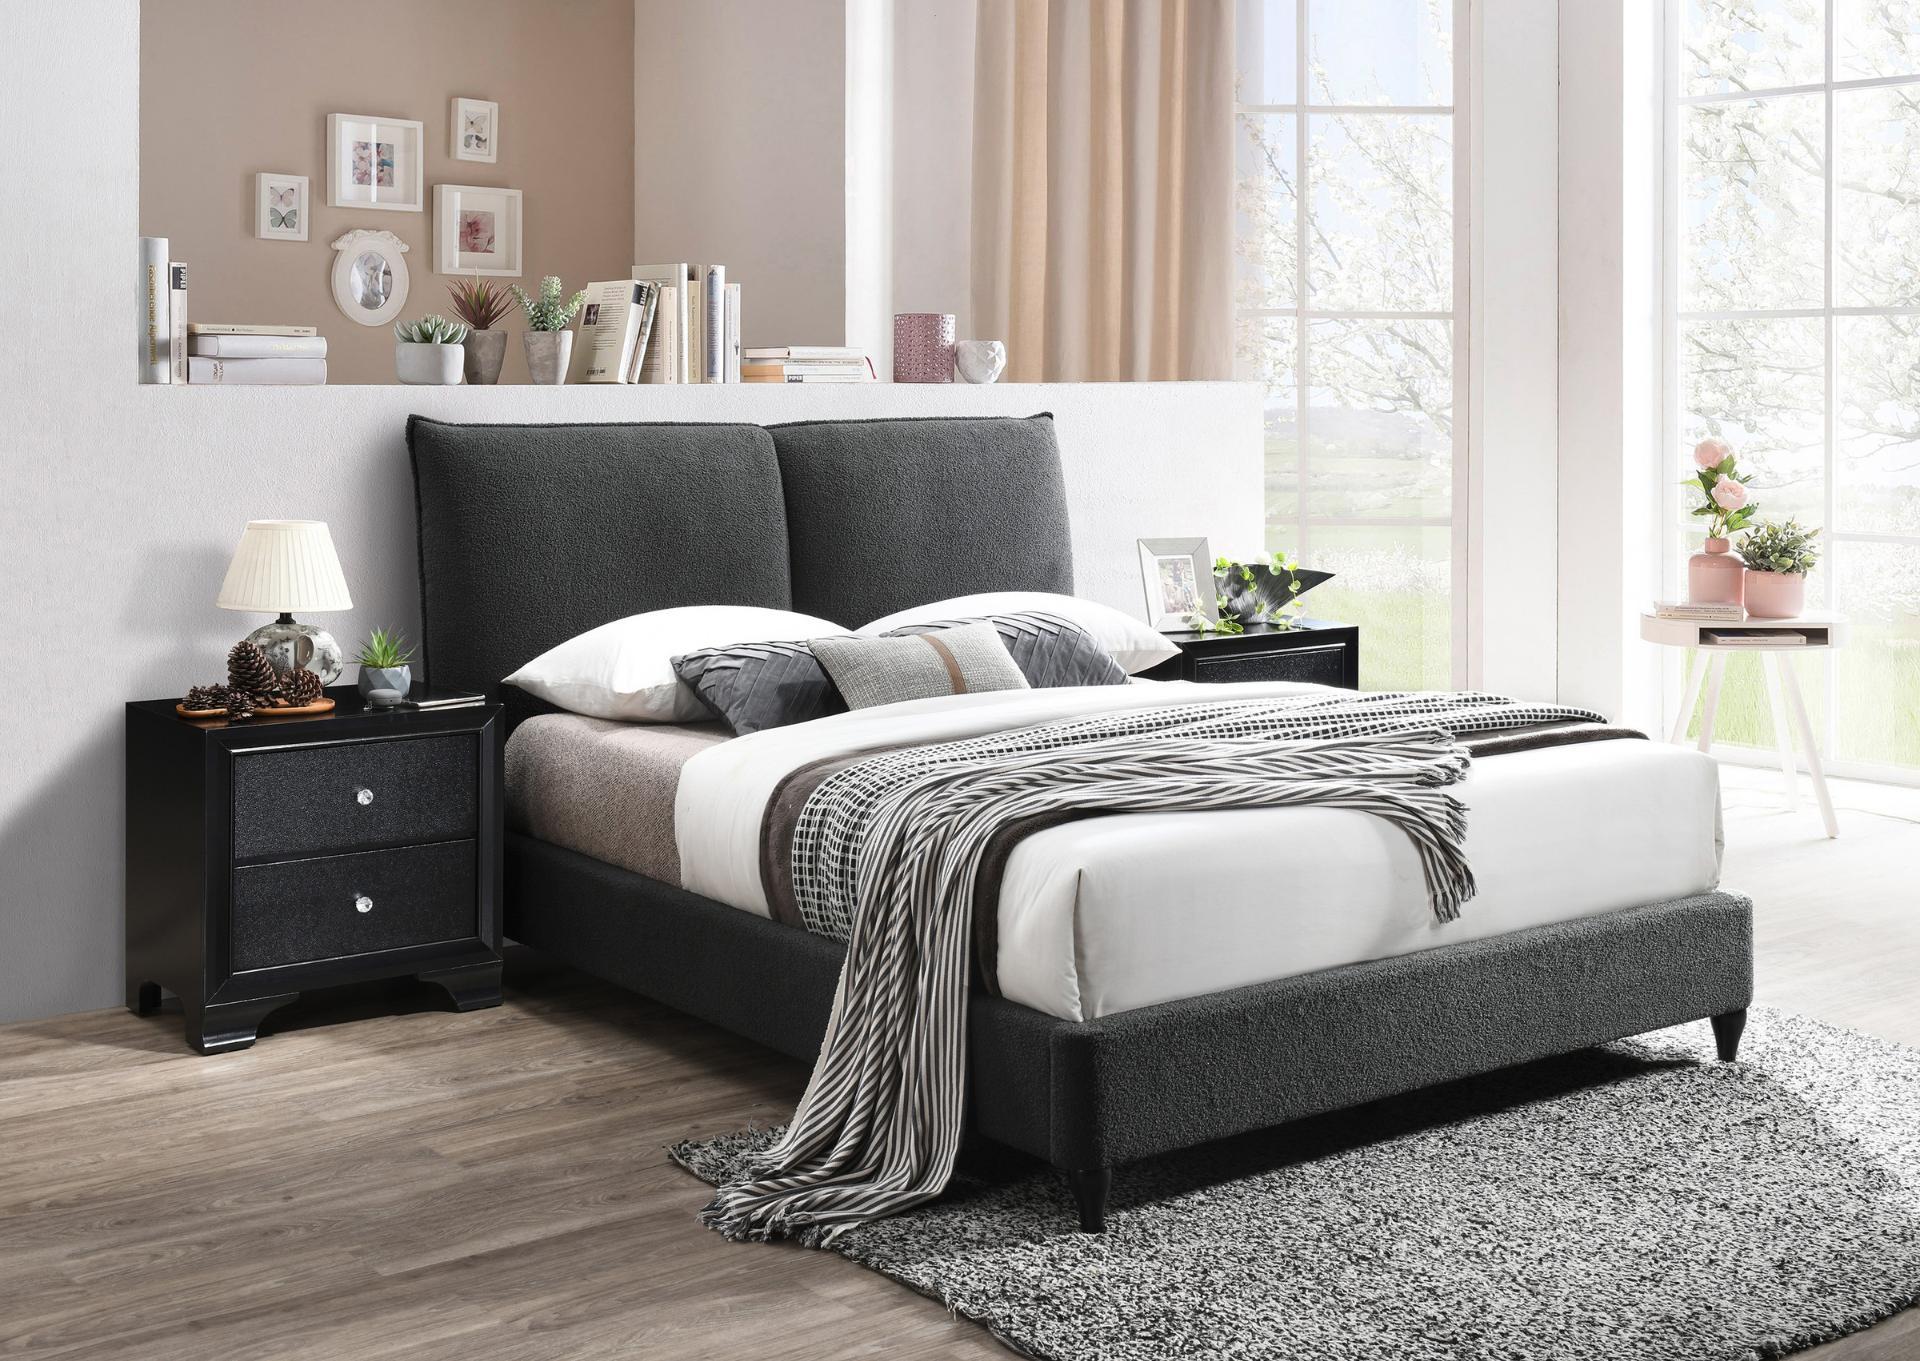 JENN CHARCOAL QUEEN BED,CROWN MARK INT.